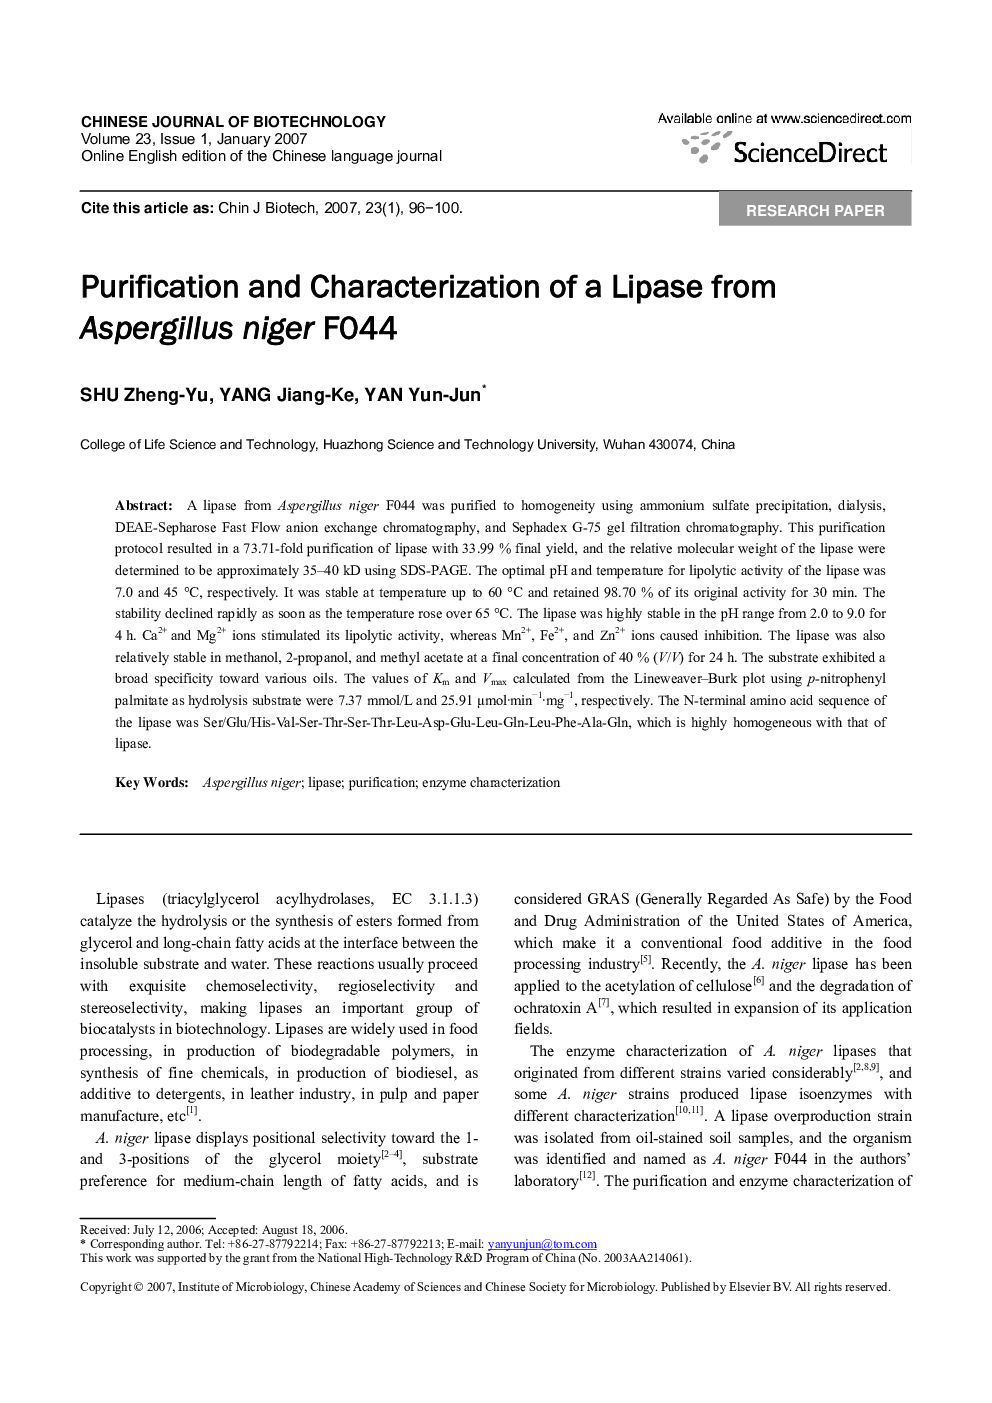 Purification and Characterization of a Lipase from Aspergillus niger F044